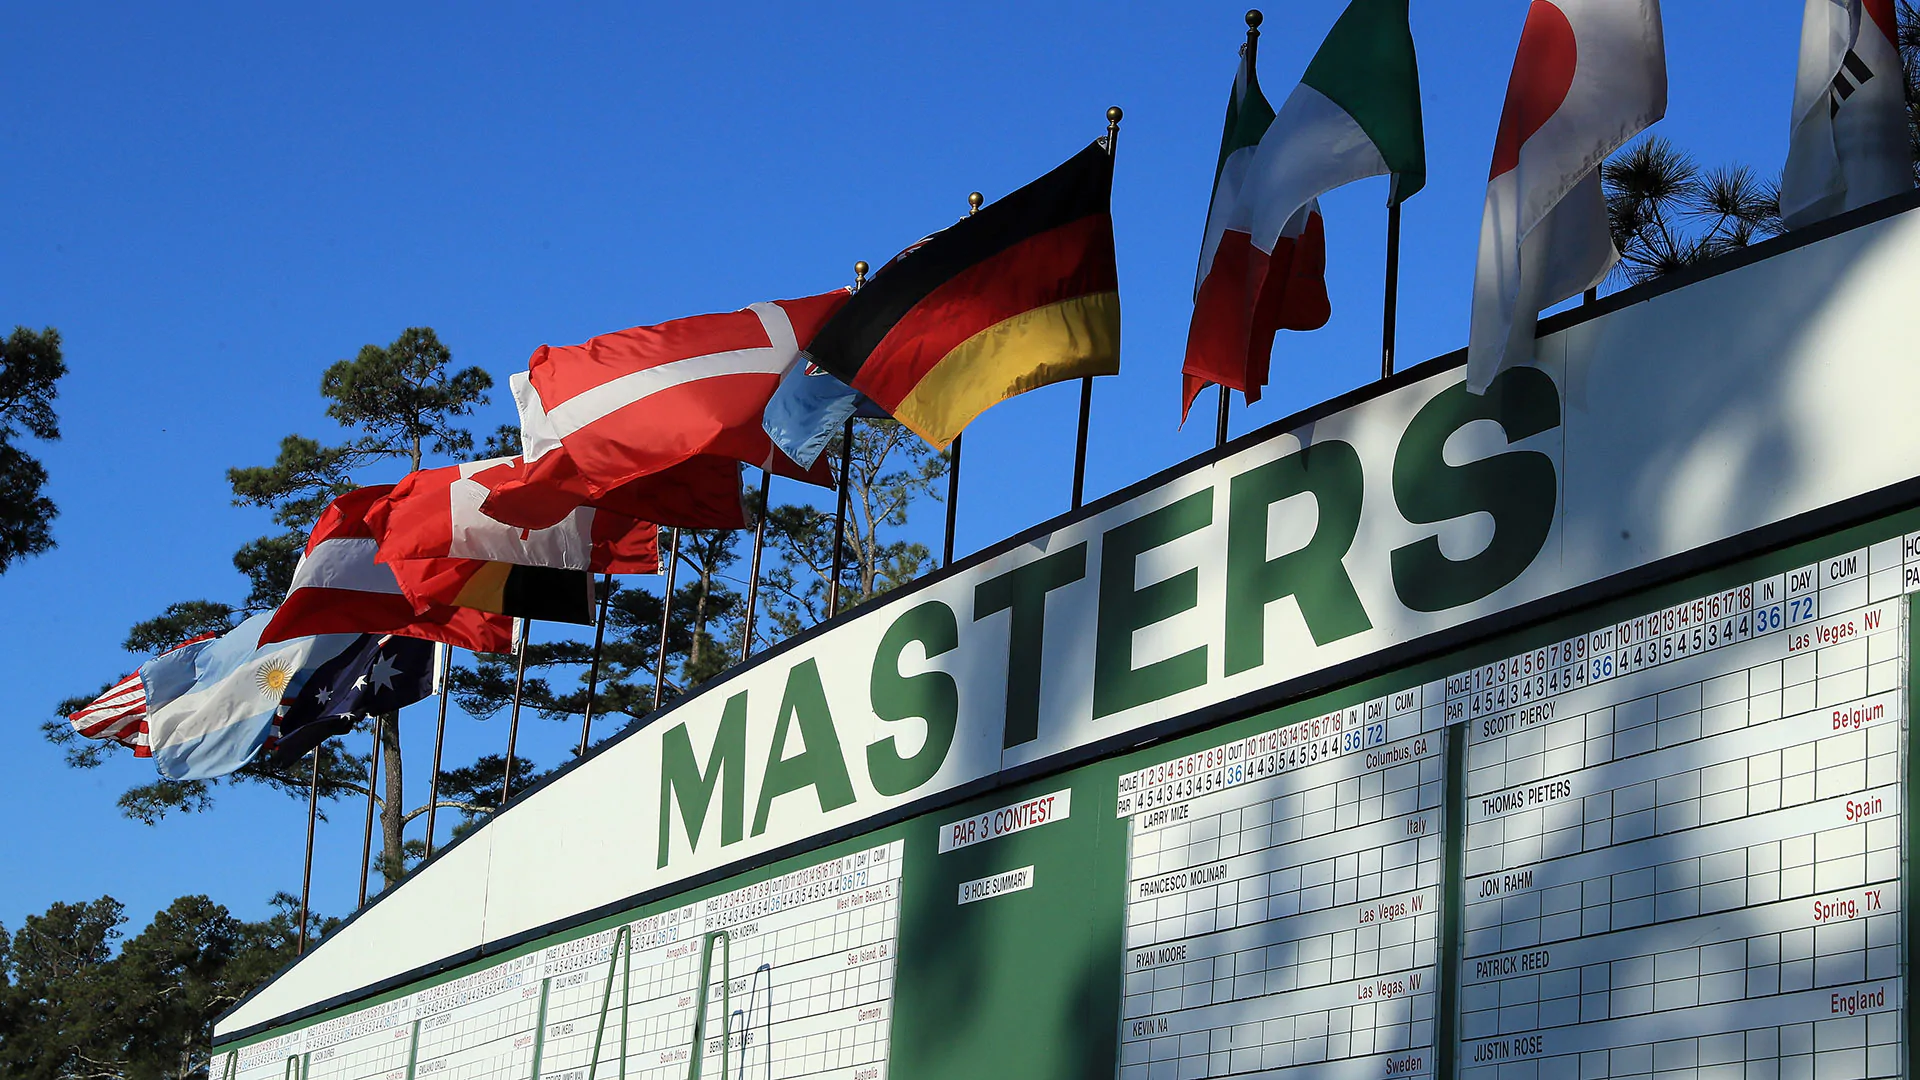 Round 1 and 2 tee times for the 82nd Masters